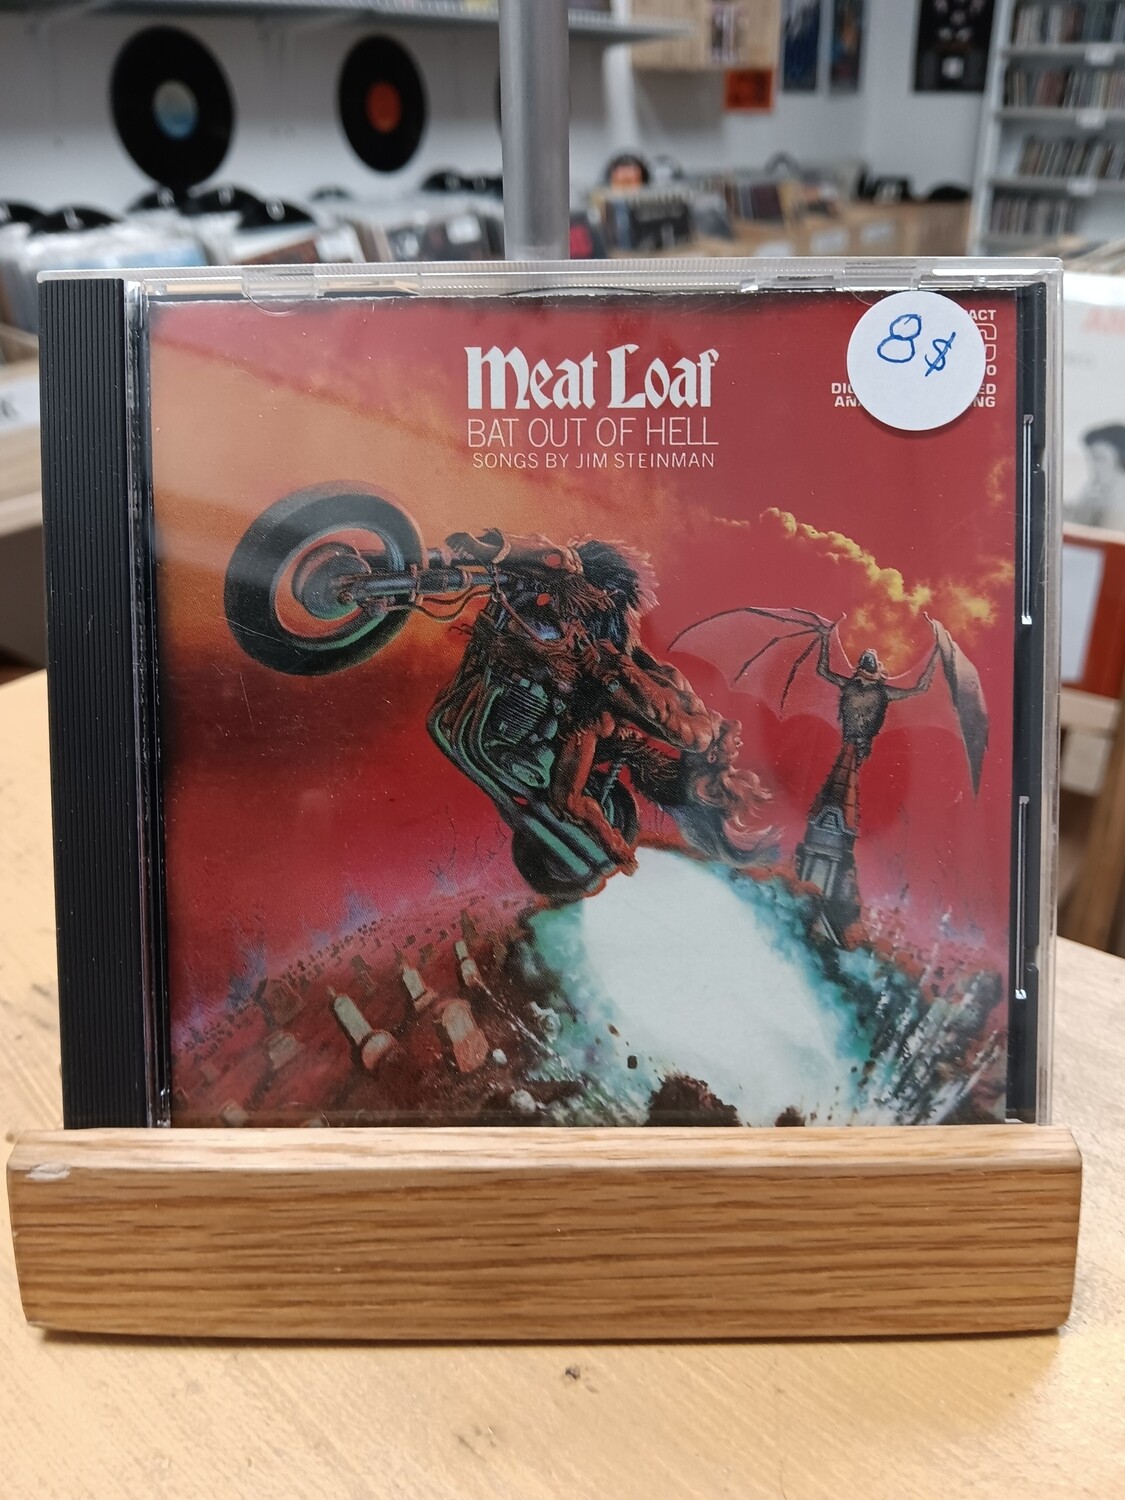 Meatloaf - Bat out of hell (CD)